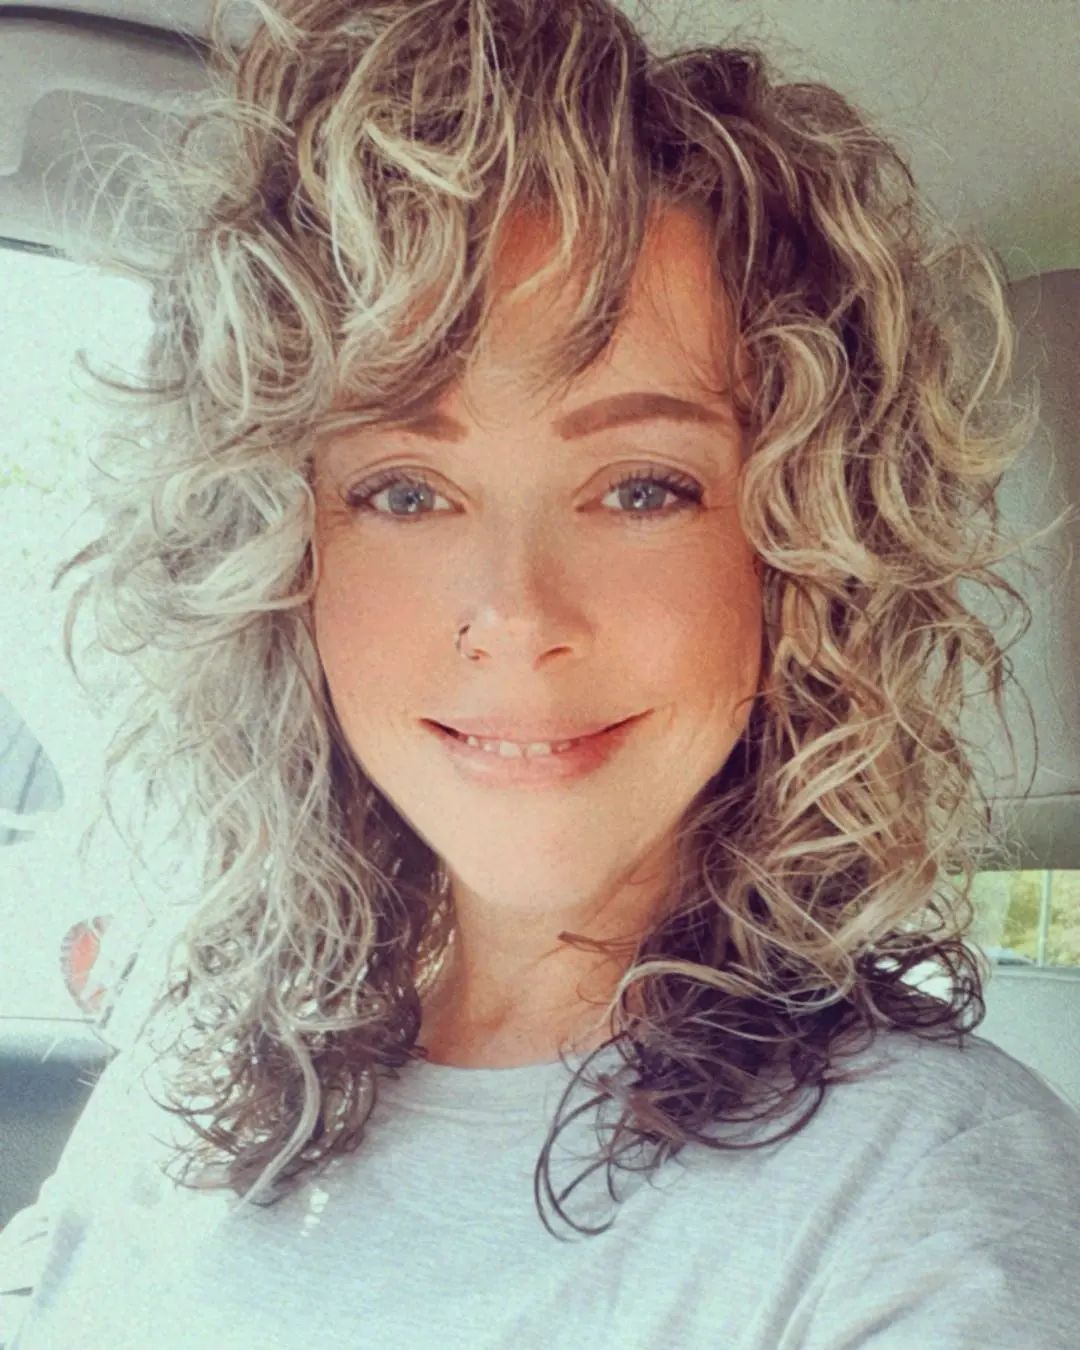 Curly Shag Hairstyle 78 Curly hair shaggy bob | Curly shag mullet | Medium length curly shags Curly Shag Hairstyles for Women